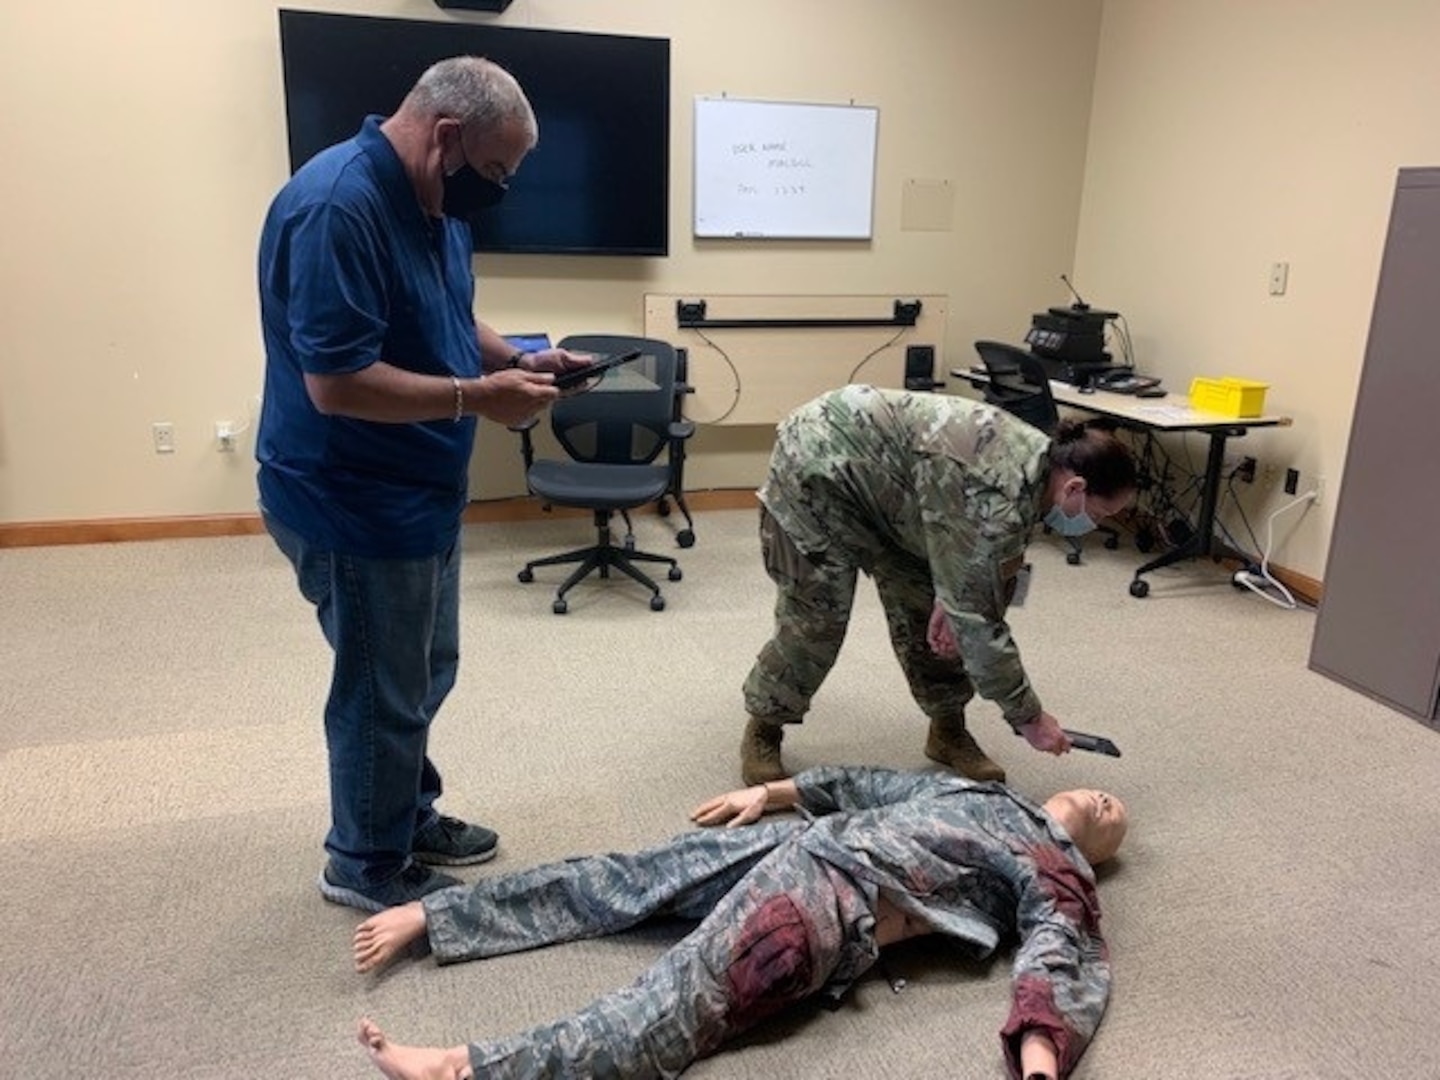 Richard Cook, left, assigned to the 6th Medical Group Education and Training Flight, directs a student in augmented reality medical care of a simulated patient at MacDill Air Force Base, Florida, Aug. 3, 2021. The introduction of augmented reality training increases the availability of training, without a need to increase manpower availability for training setup and multiple student face-to-face interaction. (Courtesy photo)